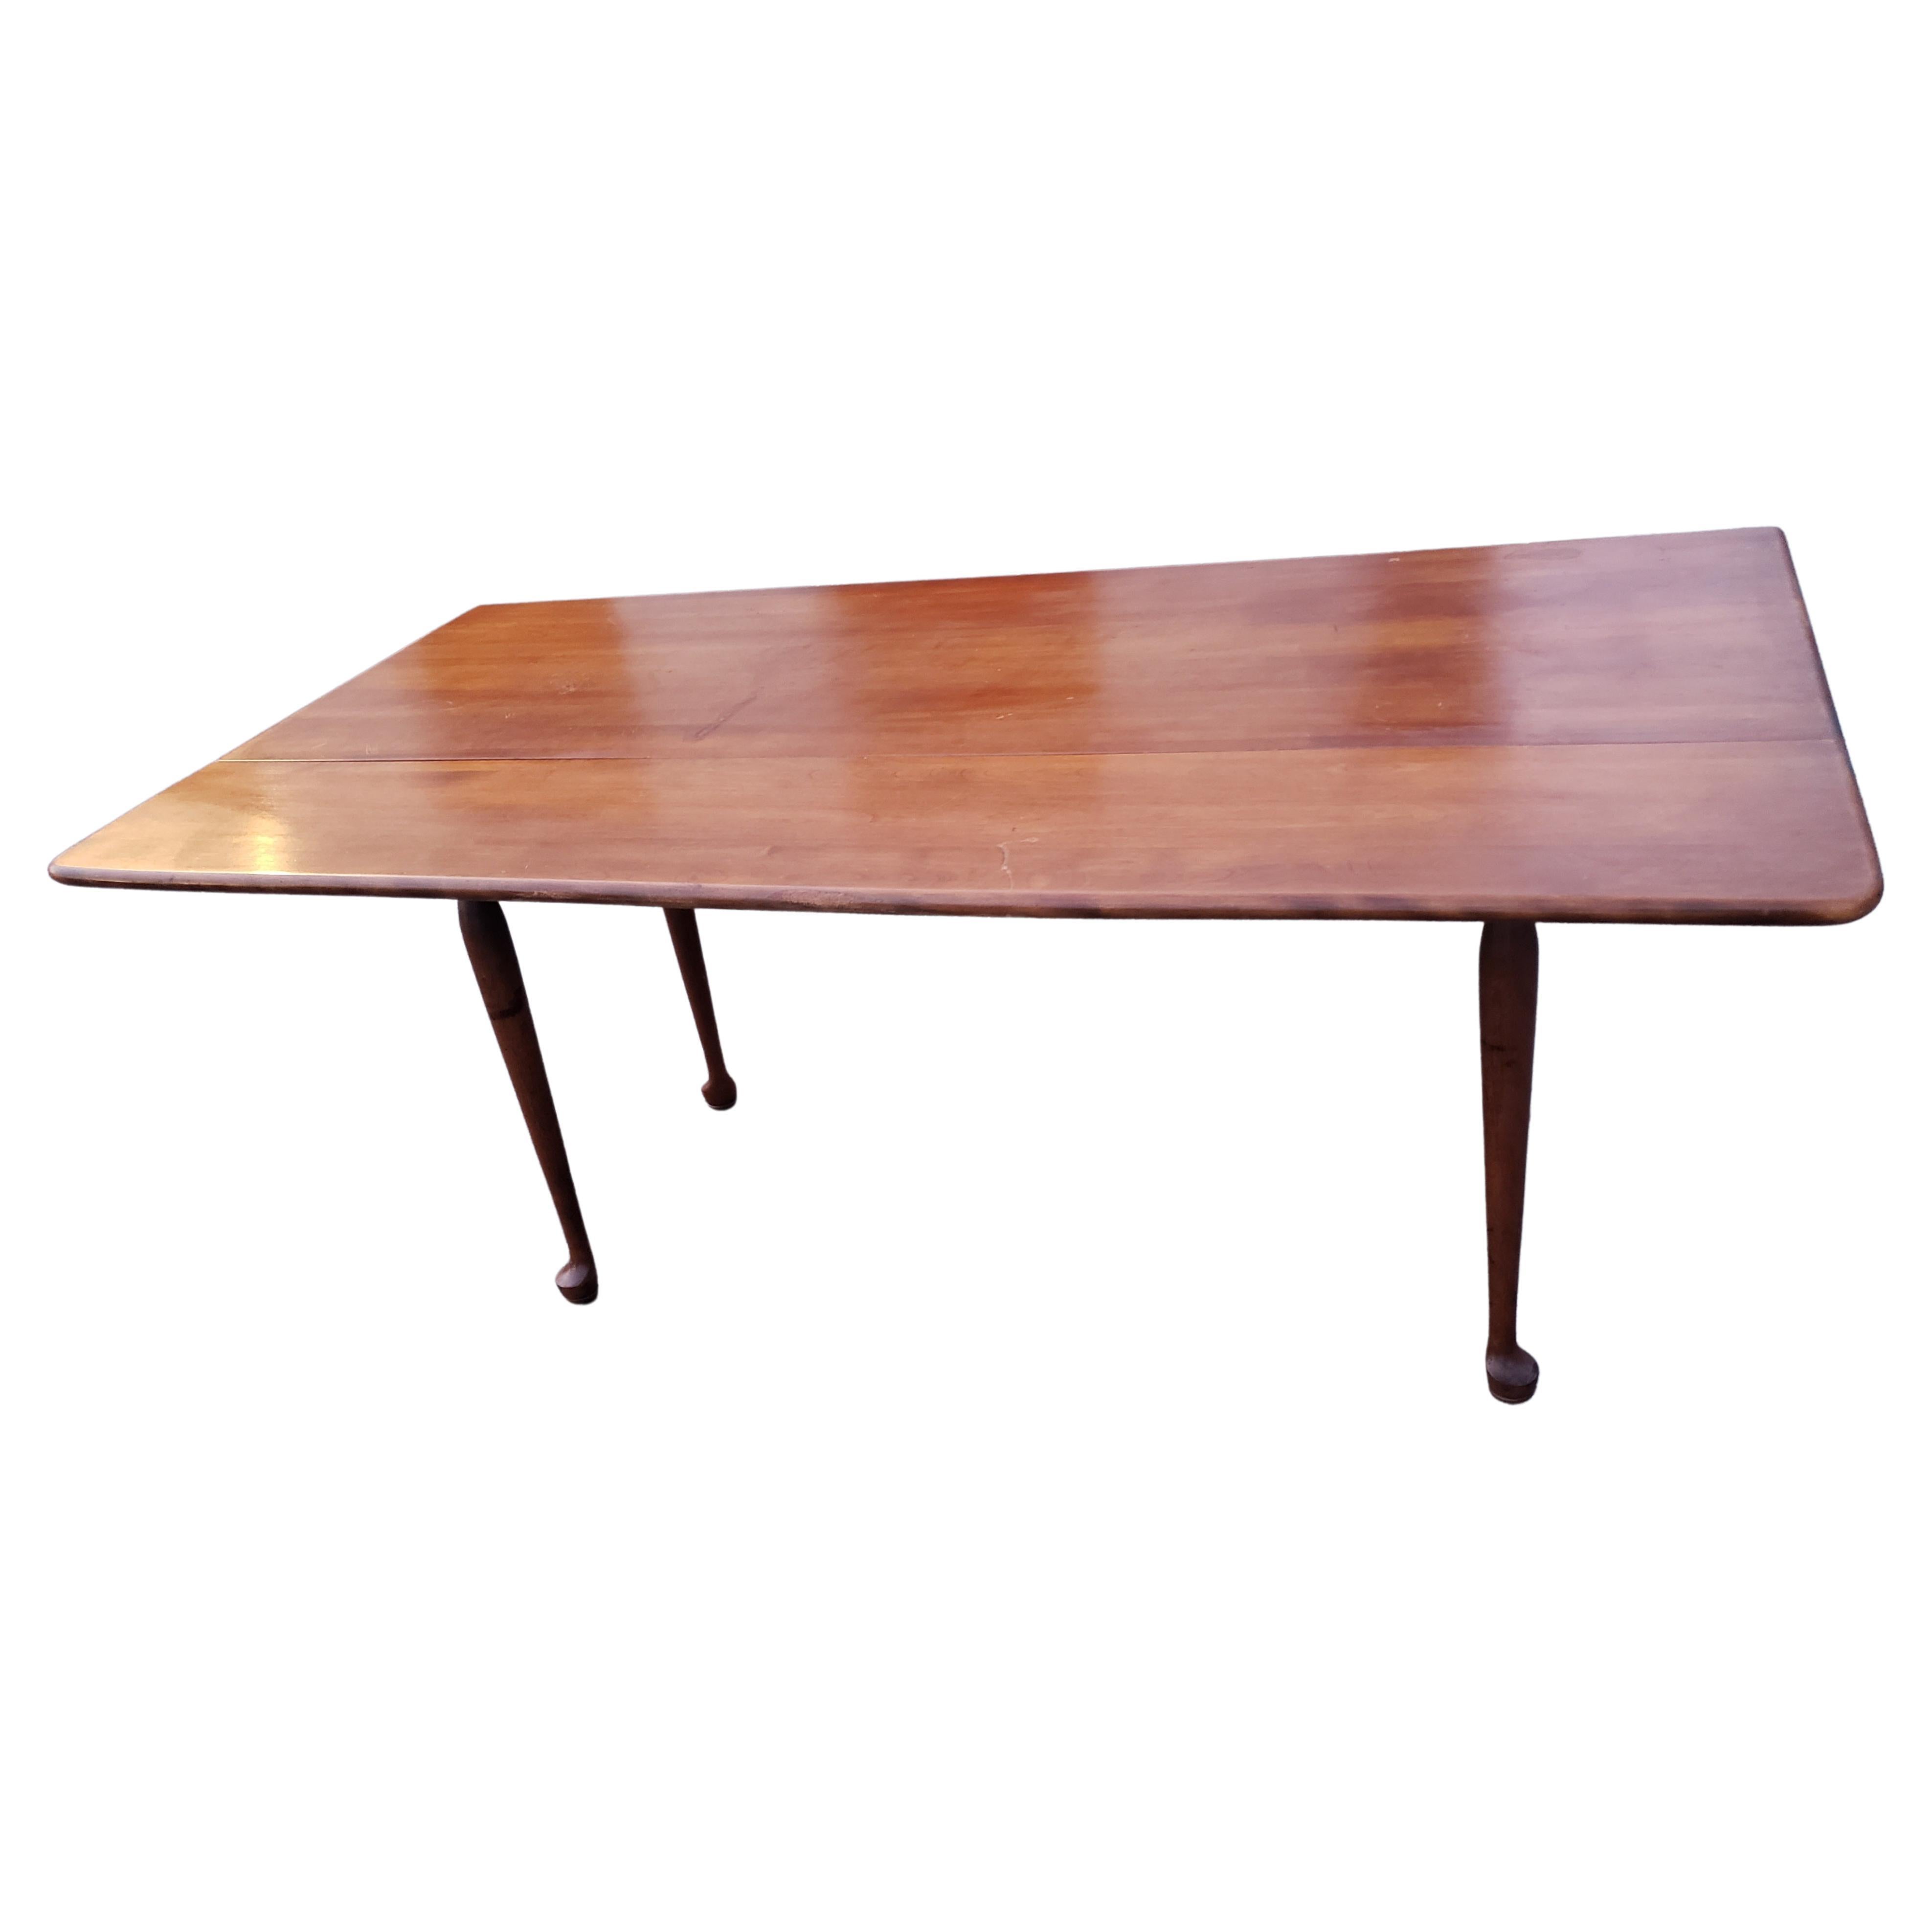 Woodwork American Rockport Maple Drop Leaf Cottage Dining Table, circa 1970s